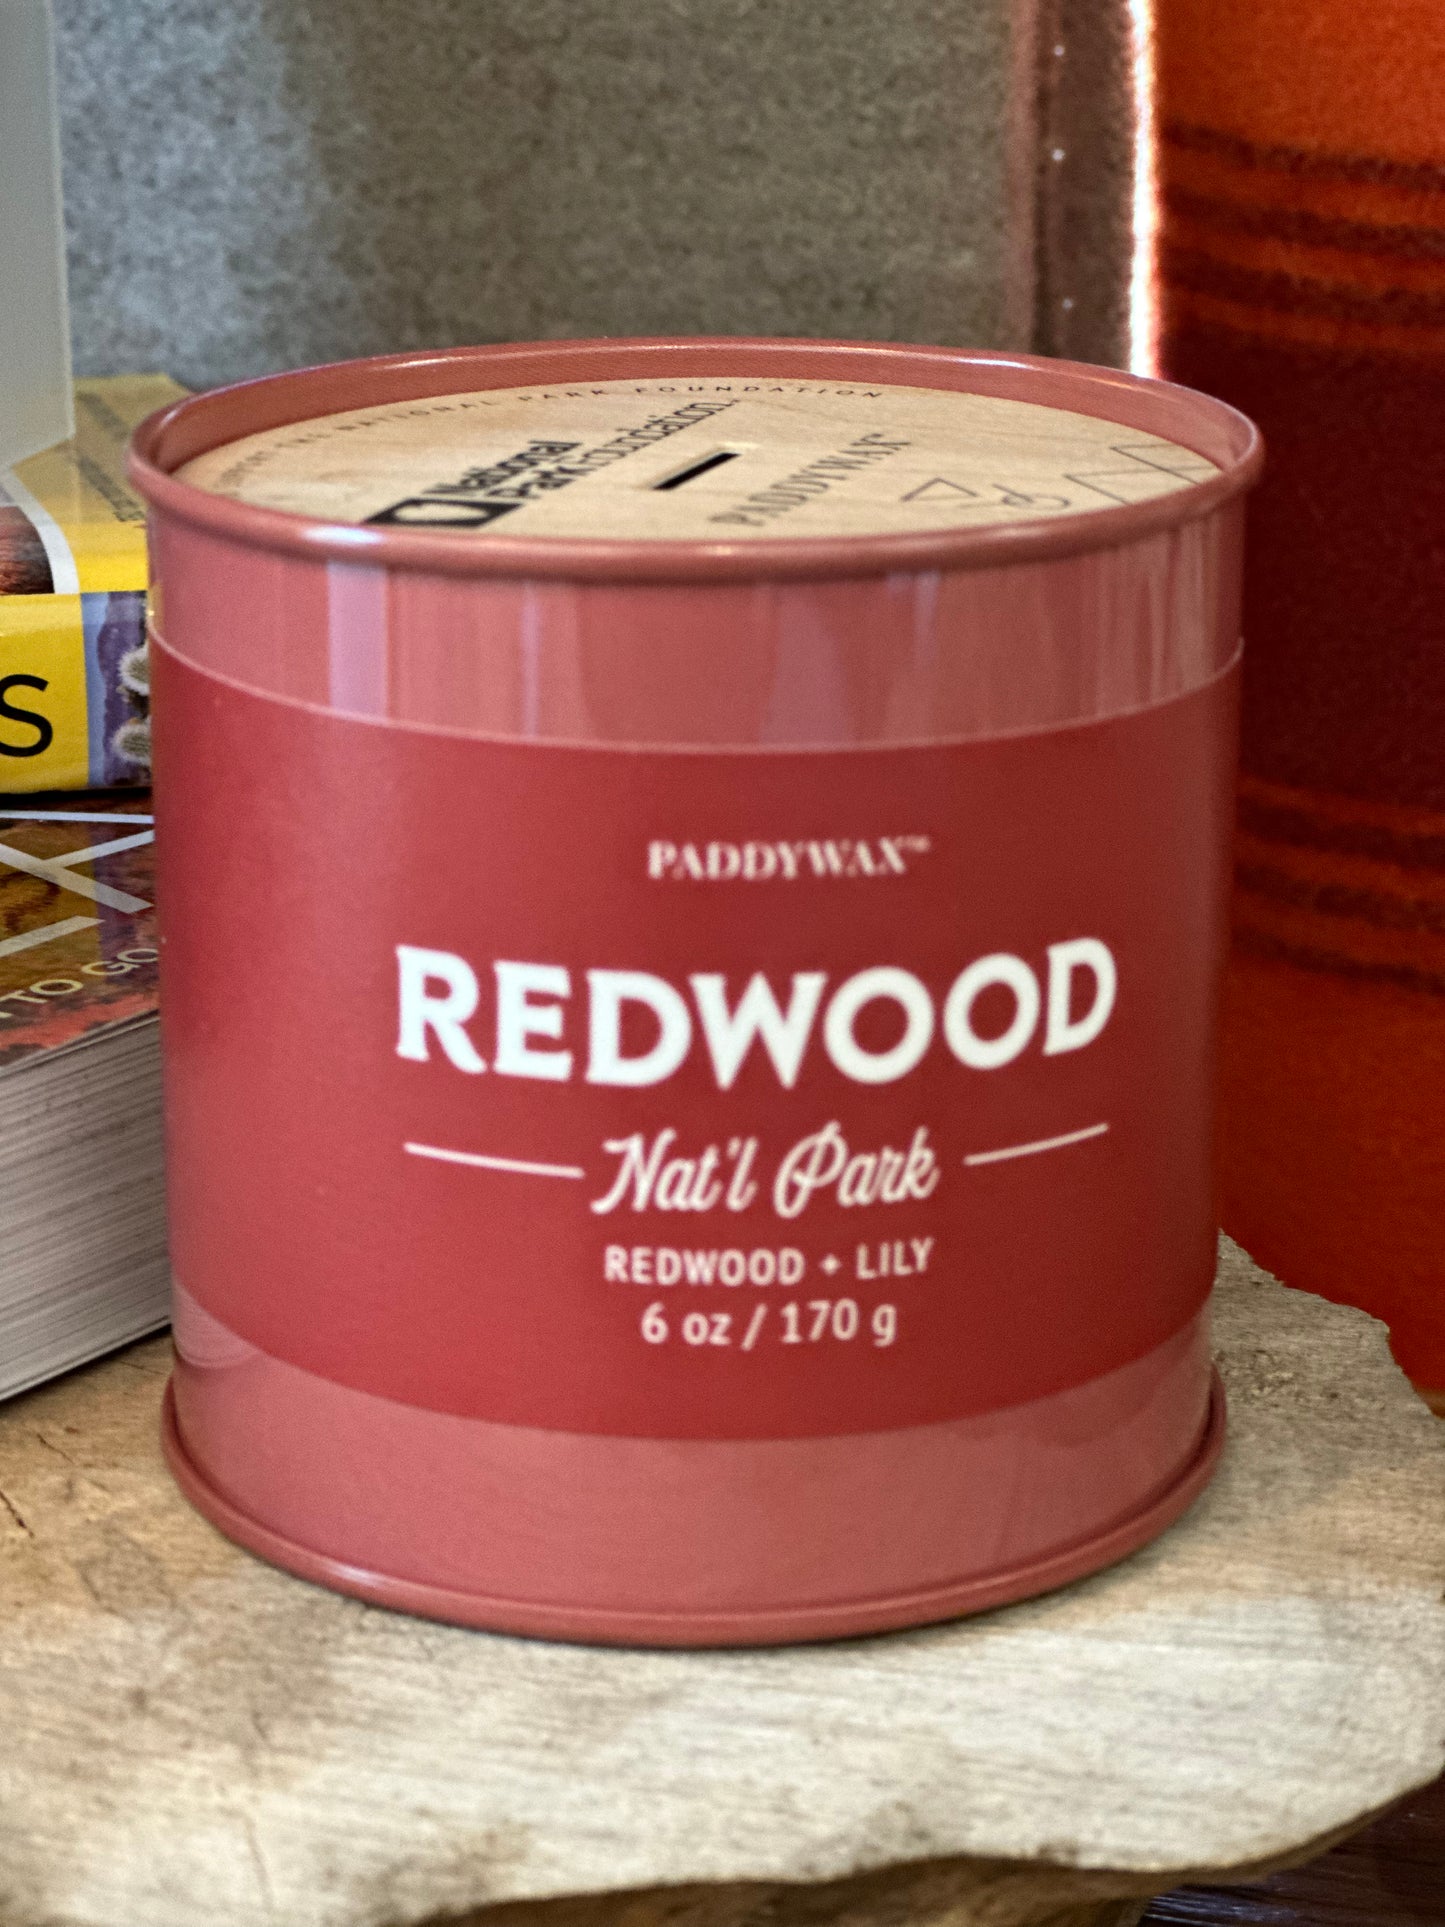 National Parks + Paddywax 6 oz. Woodwick Candle